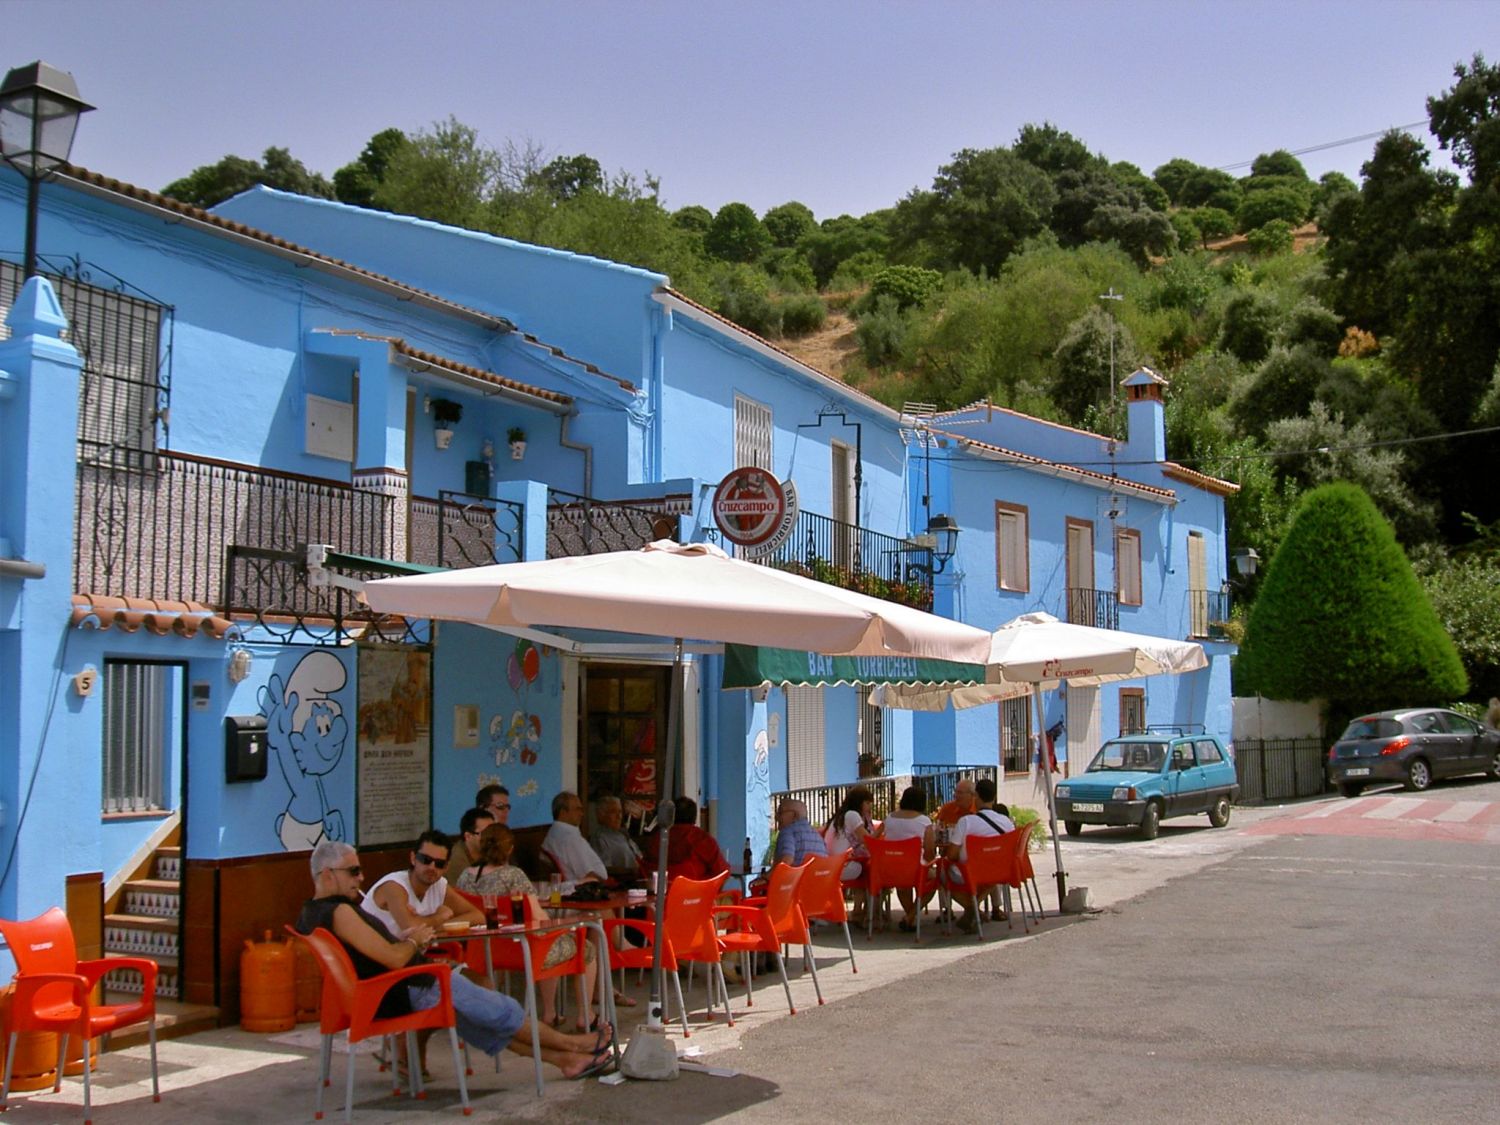 Restaurant and bar in Juzcar, Andalucia, Spain